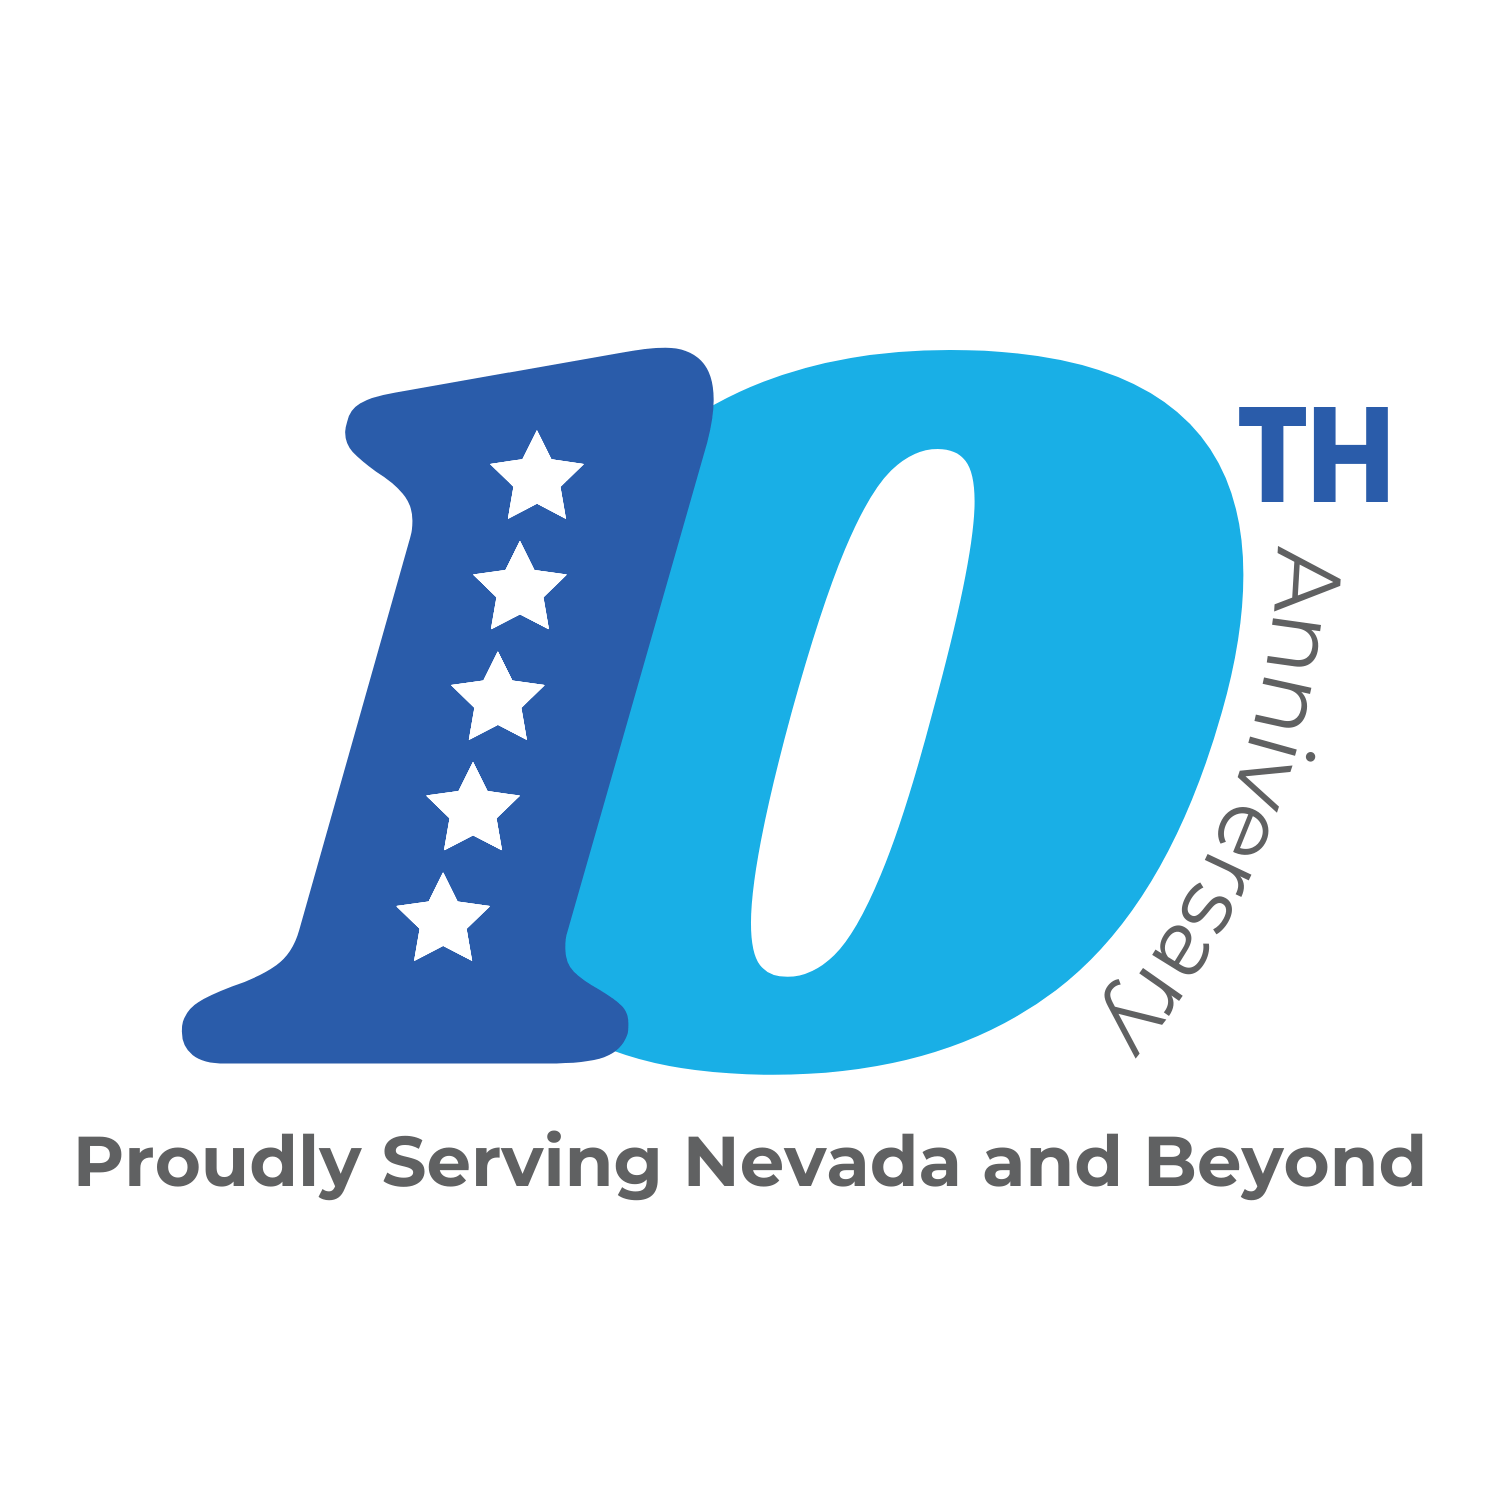 Experienced staffing agency in Nevada 10 years anniversary logo